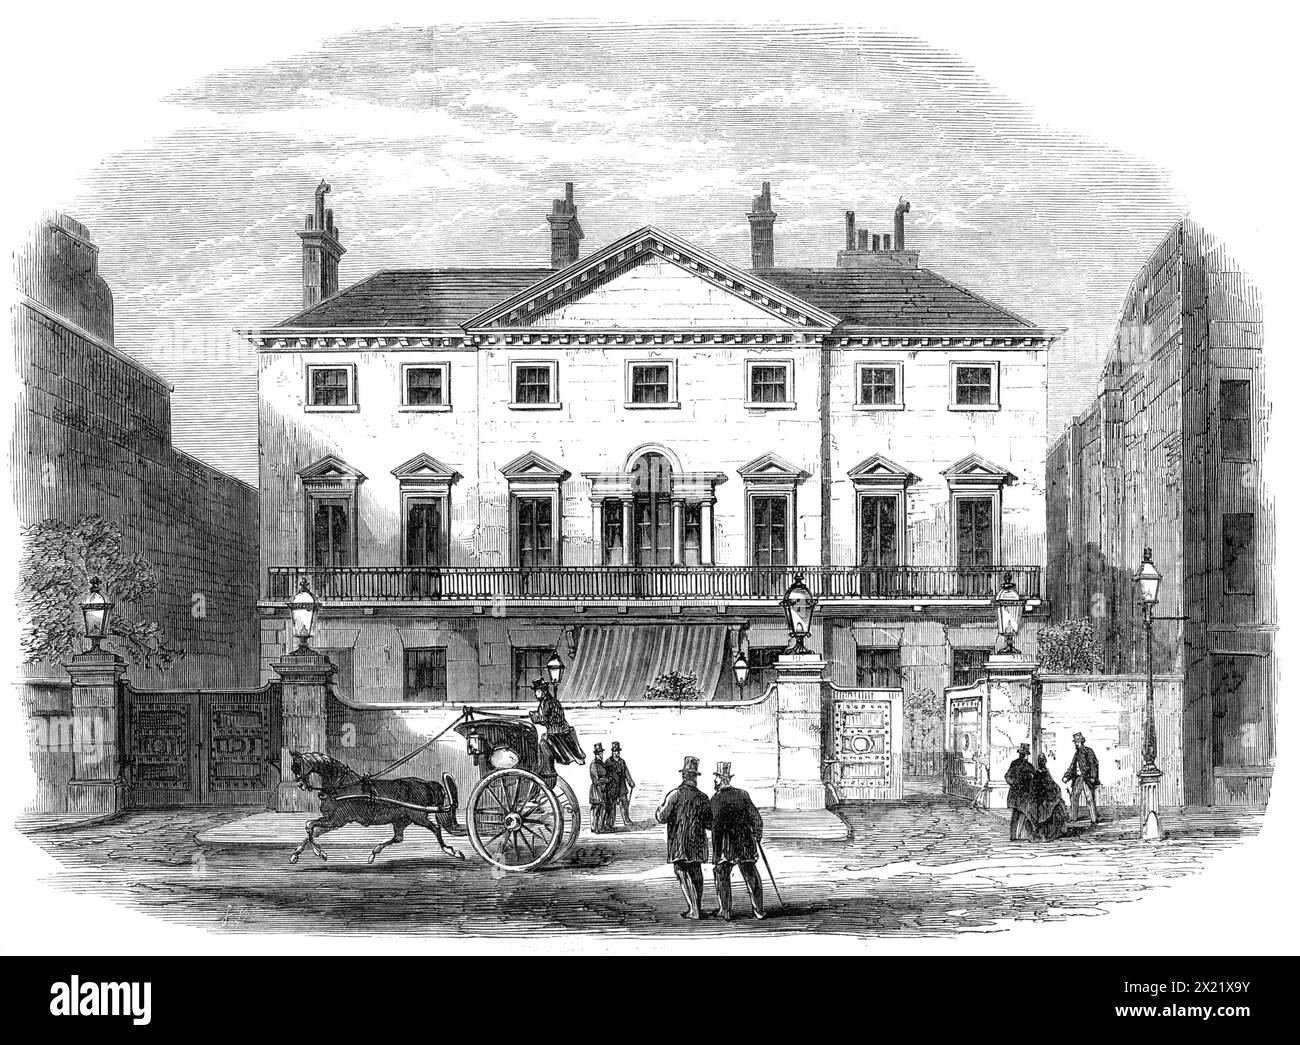 Cambridge House, Piccadilly, the town residence of Lord Palmerston, 1865. 'Cambridge House, or rather, as Lord Palmerston, in dating his letters, preferred to style his town residence, 94, Piccadilly, is well known to everybody who has seen London. It was occupied by the late Duke of Cambridge, who died there in 1850, and Lord Palmerston has lived there ever since. Here were the Saturday evening receptions, at which Lord and Lady Palmerston, with that winning courtesy and hospitality which they made an instrument of political and social power, so frequently entertained a large number of the me Stock Photo